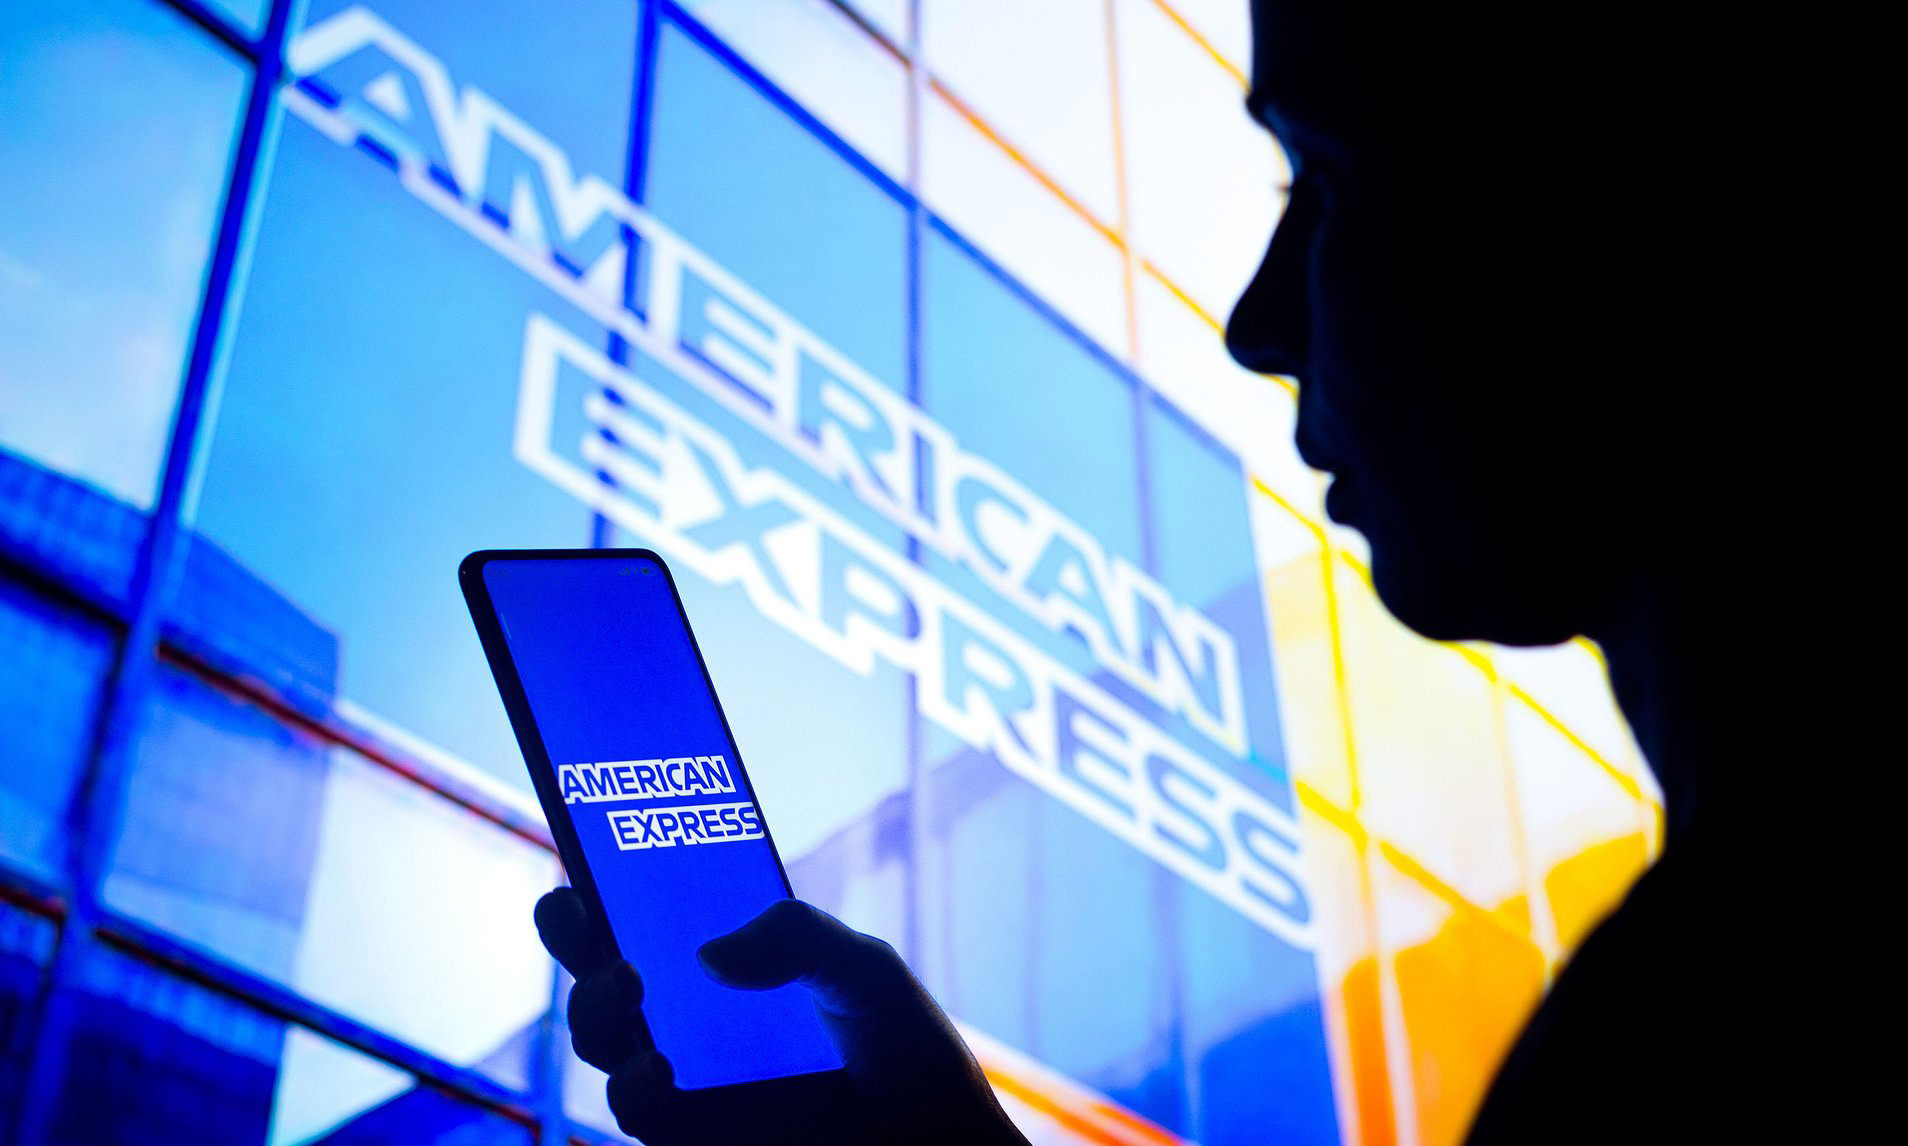 American Express HACKED by thirdparty service provider that accessed